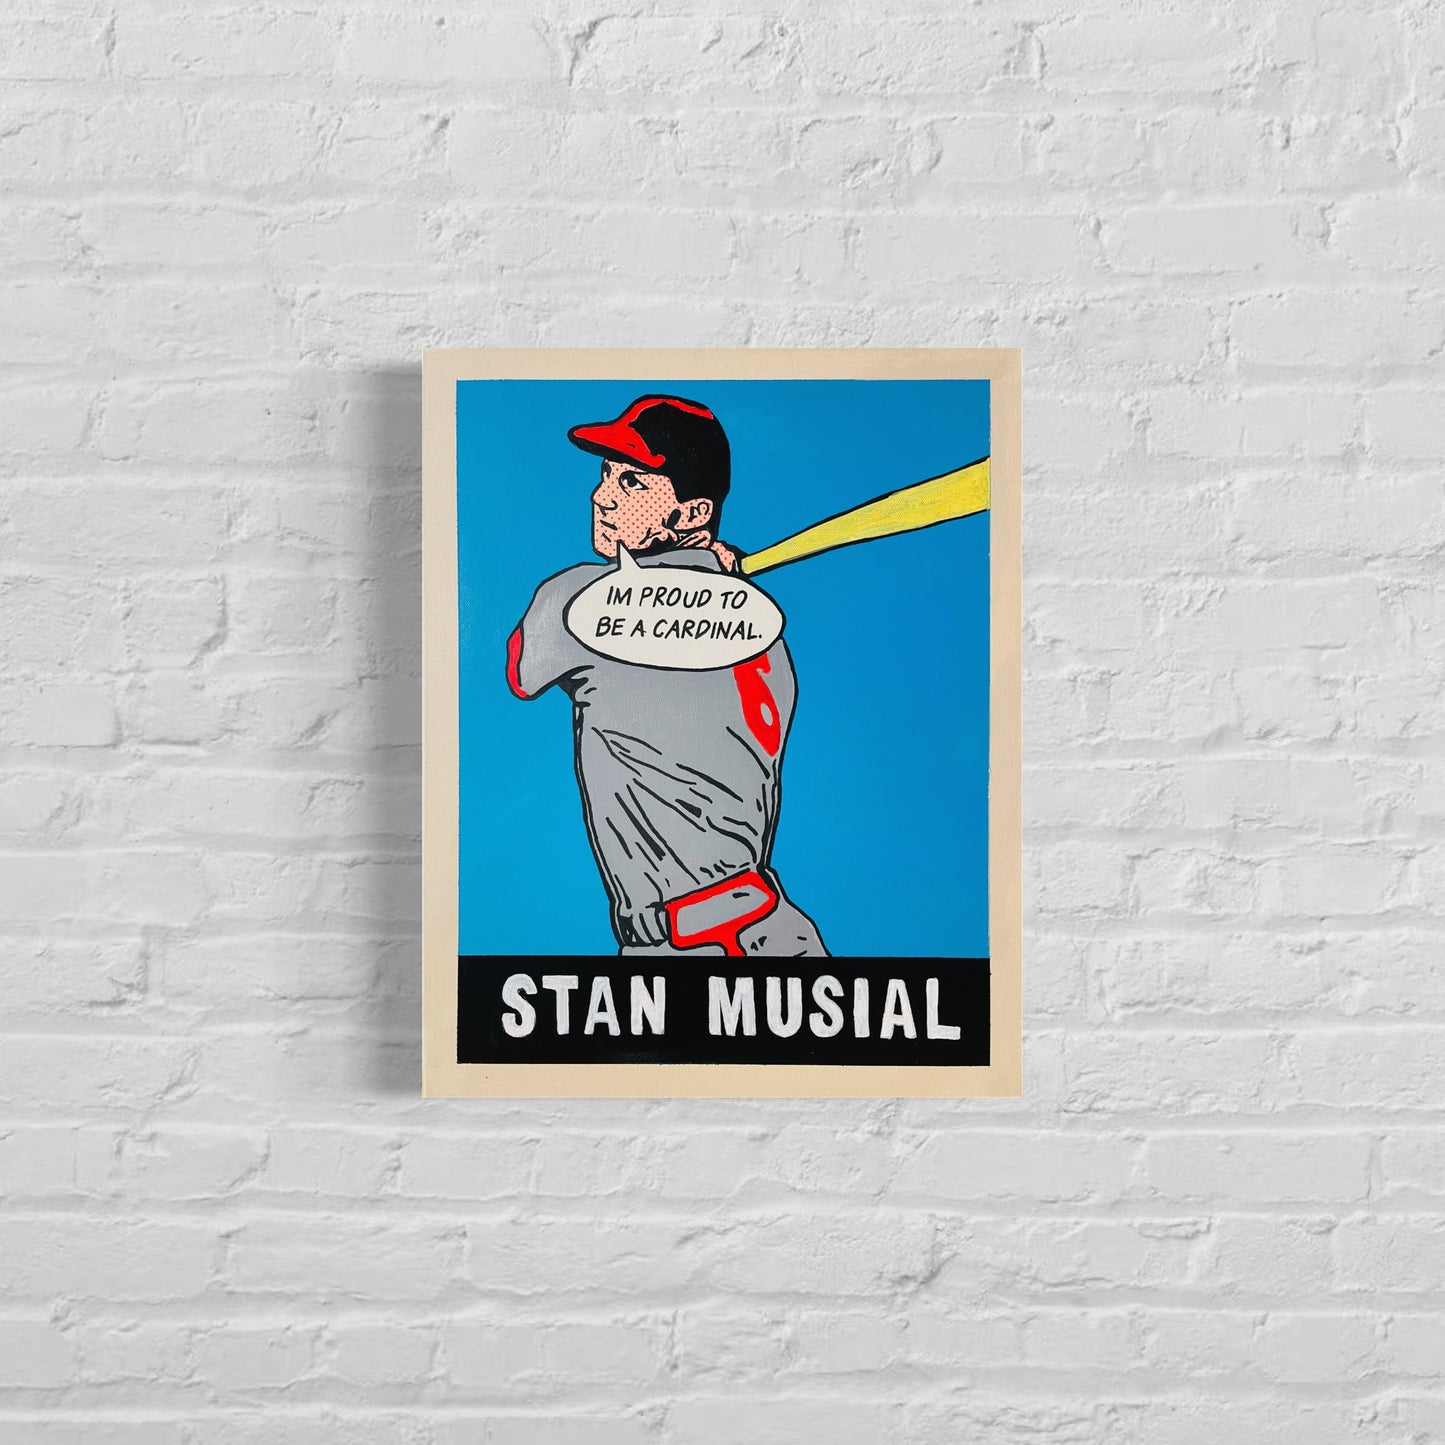 Stan Musial “If Cards Could Talk”, 2022.